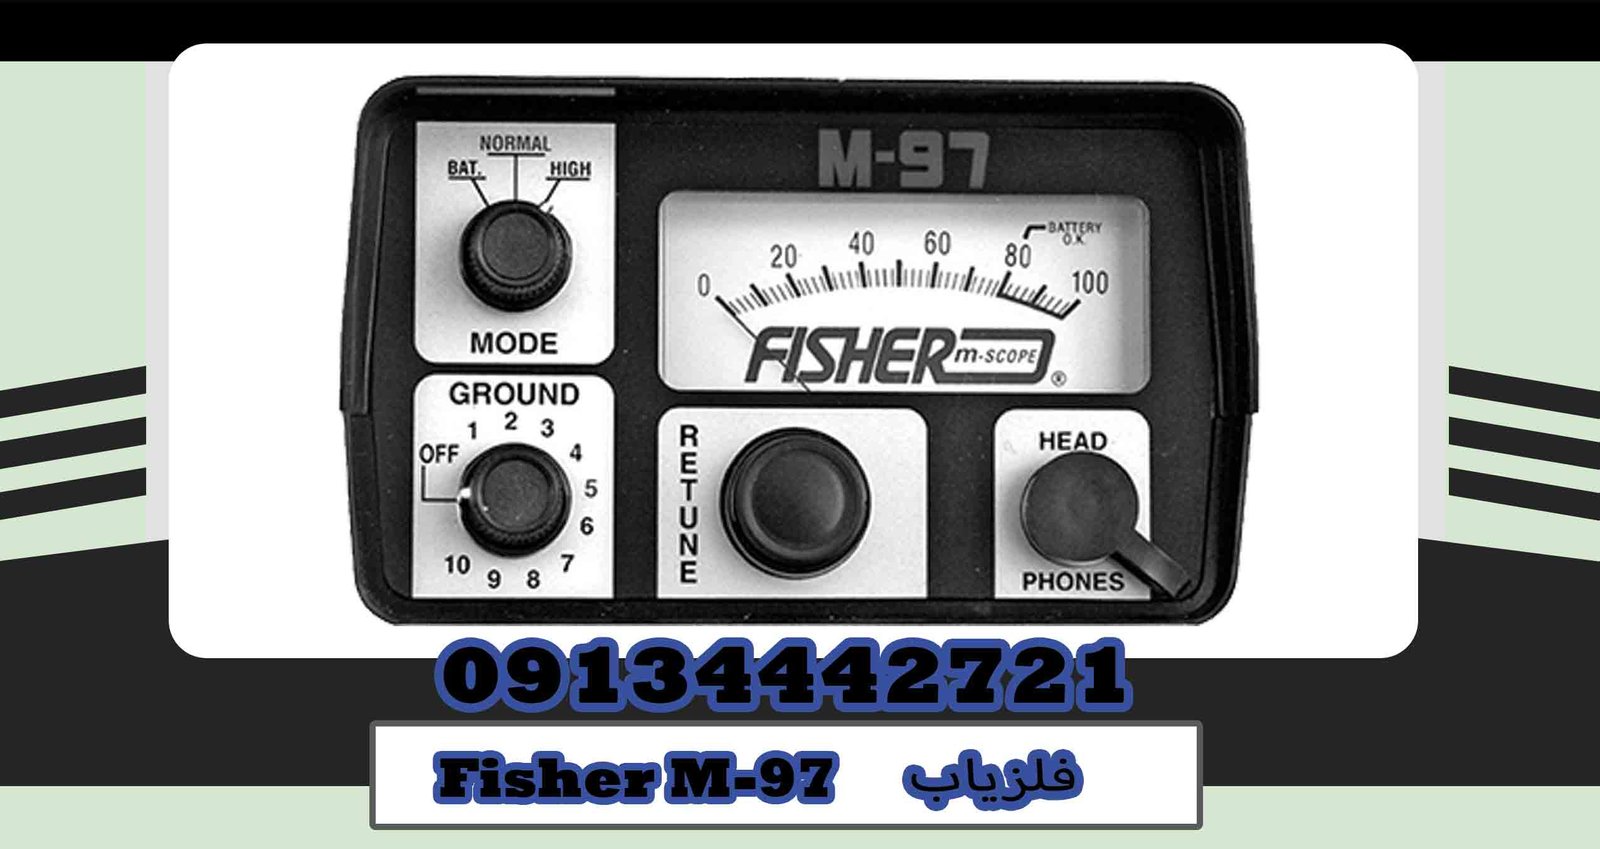 Fisher M-97